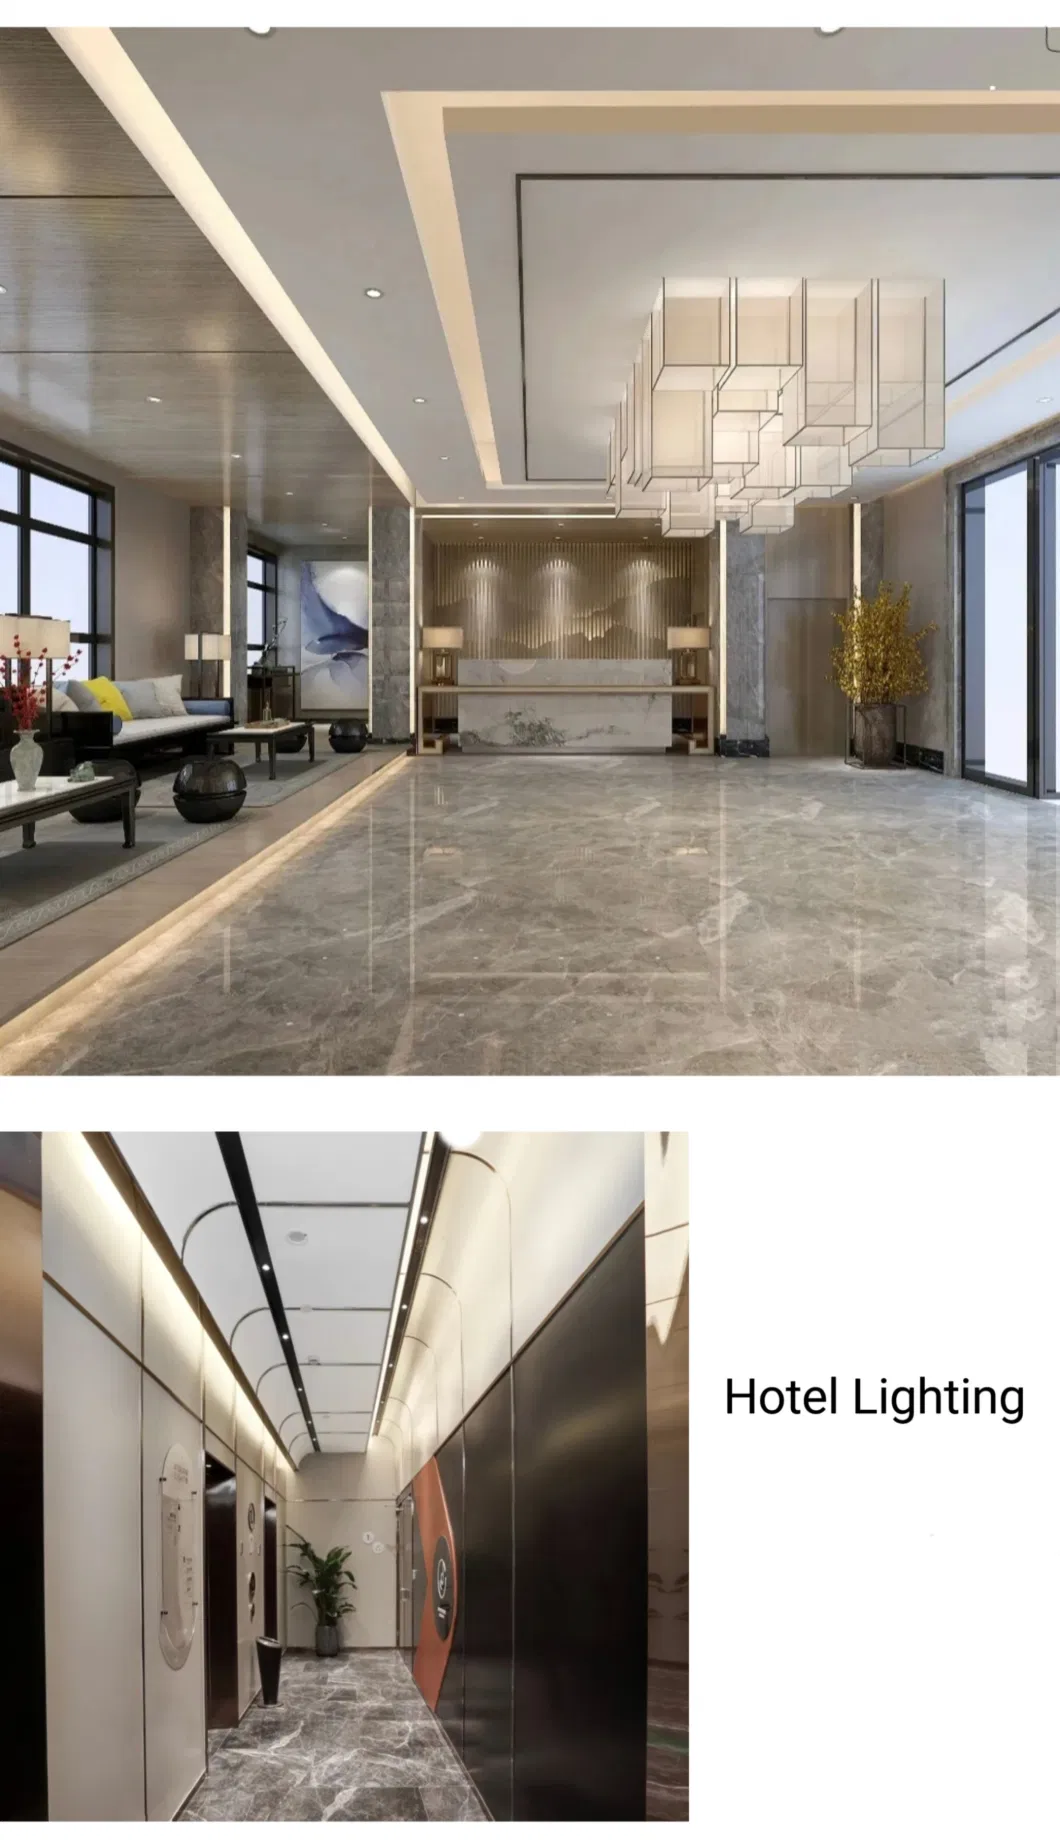 24V High Quality Chip Double Row Wick Intelligent Control LED Strip Light